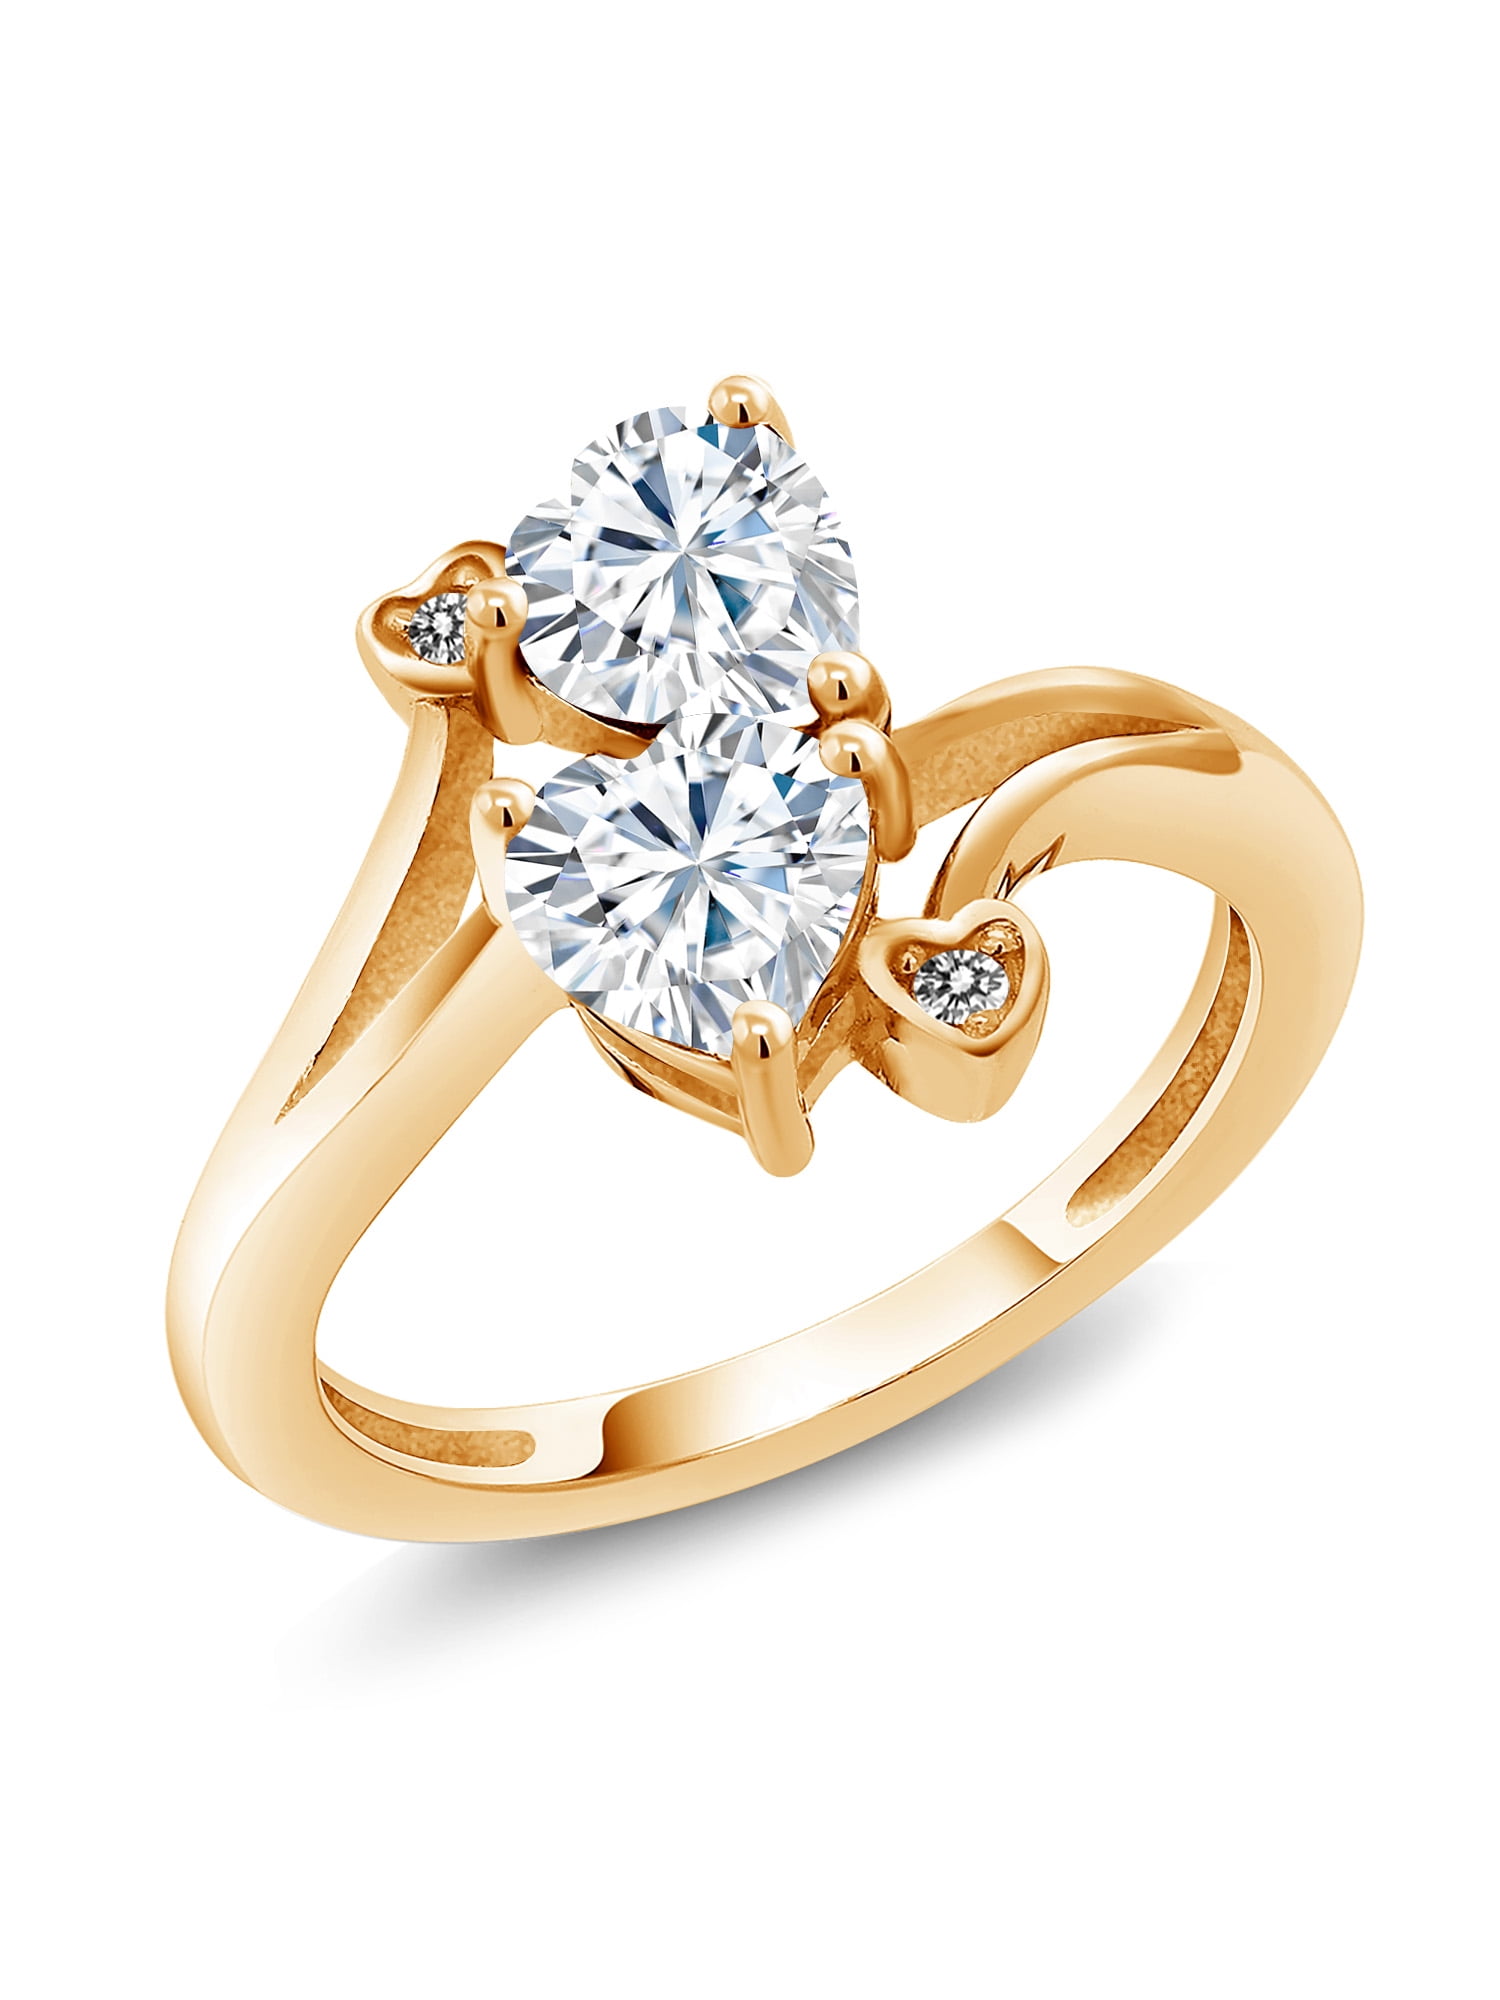 Details about   1Ct Gold Finish Love Horse Shoe Brilliant Round Diamond 925 Sterling Silver Ring 